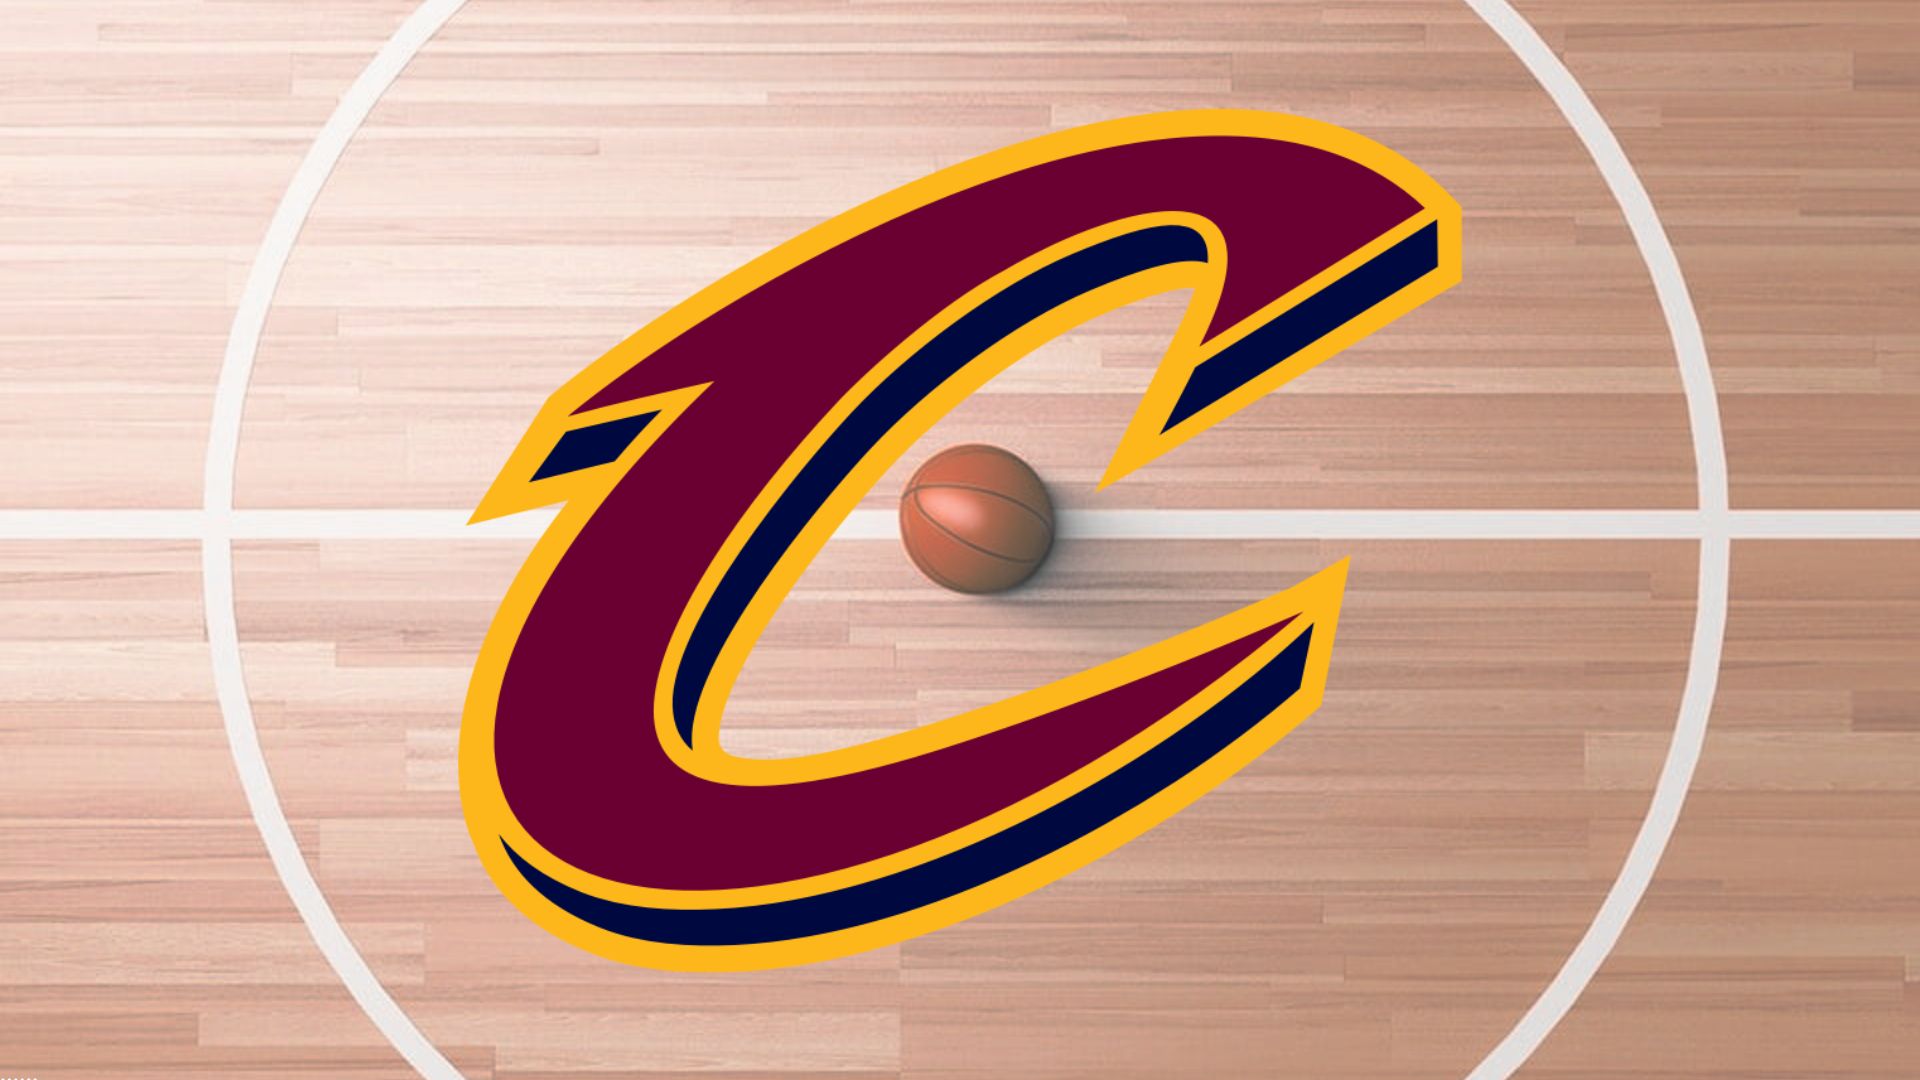 Cleveland Cavaliers: If Mitchell stays, will Garland say goodbye?